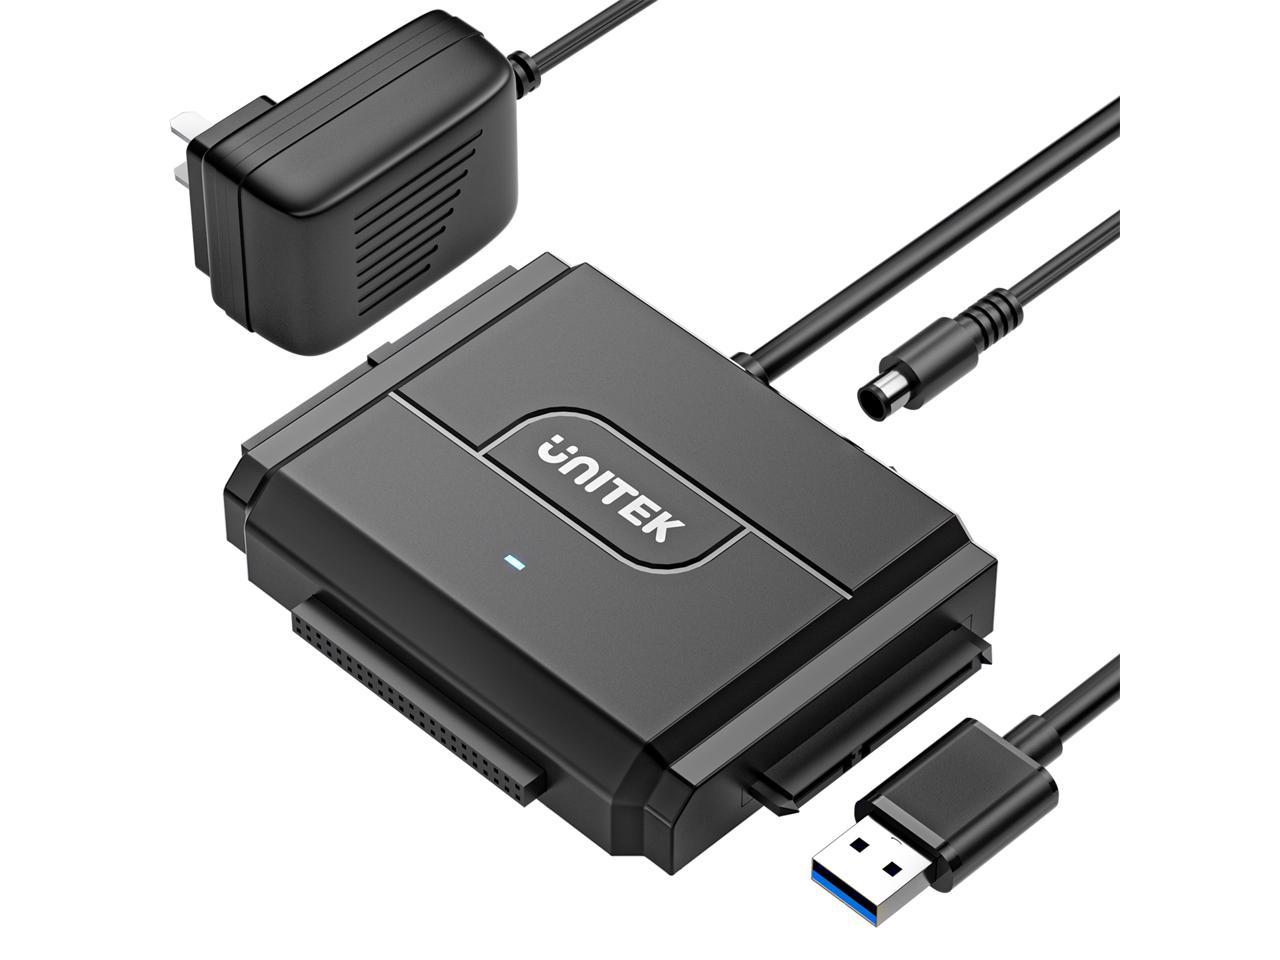 SATA/IDE to USB 3.0 Adapter, UNITEK IDE Hard Drive Adapter for Universal 2.5"/3.5" IDE and SATA External HDD/SSD with 2A Power Adapter, Support 10TB - Newegg.com